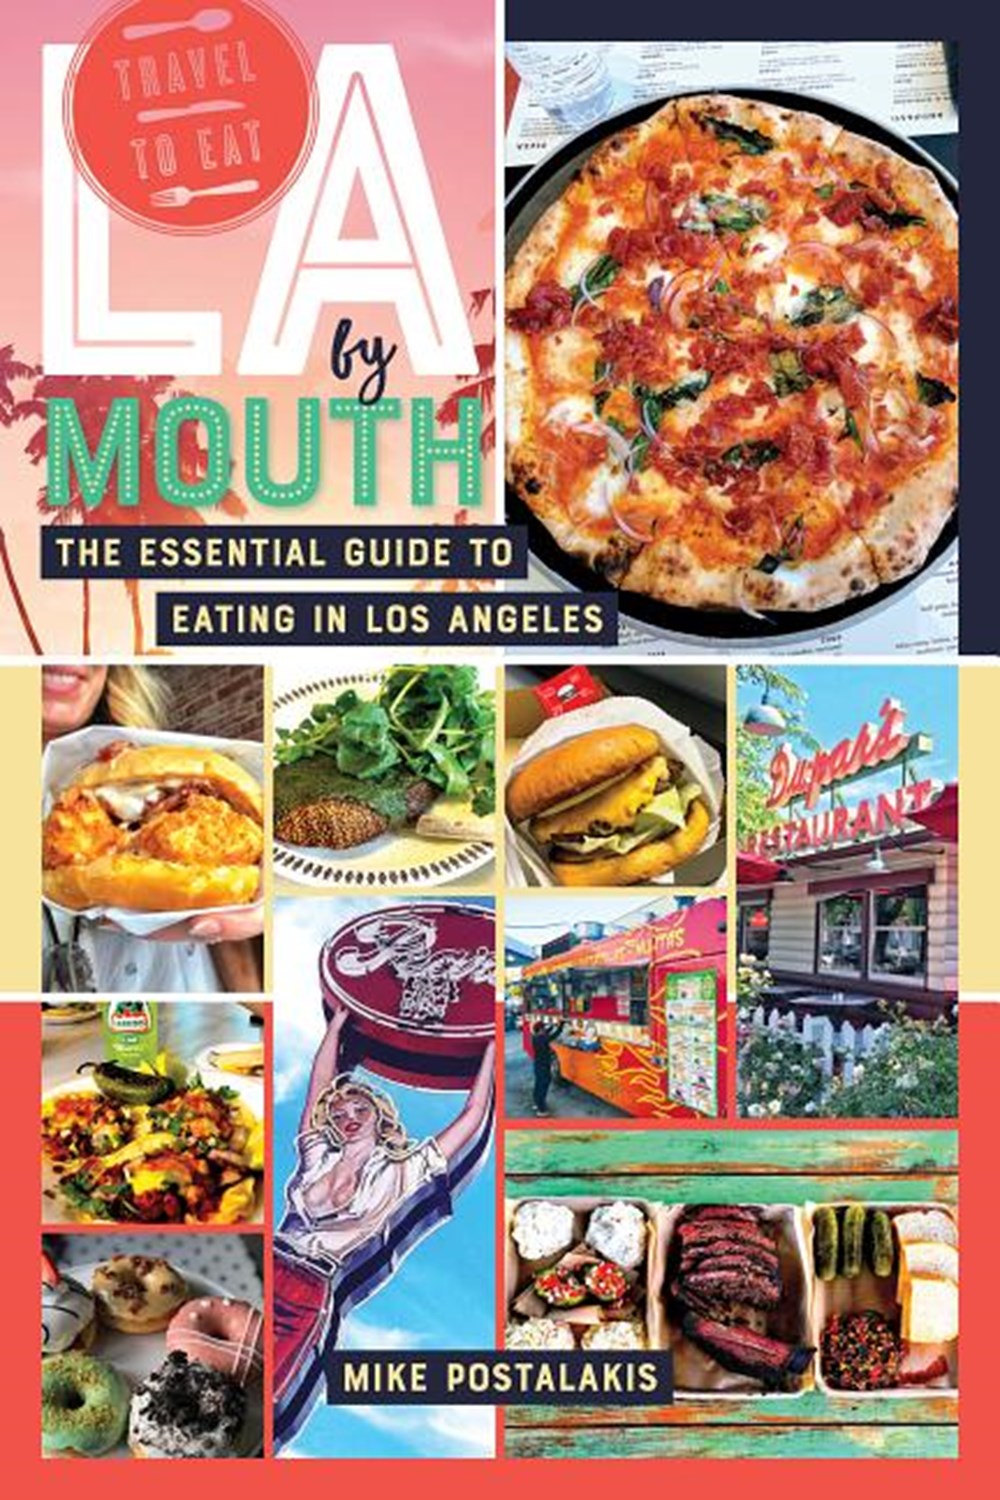 La by Mouth: The Essential Guide to Eating in Los Angeles